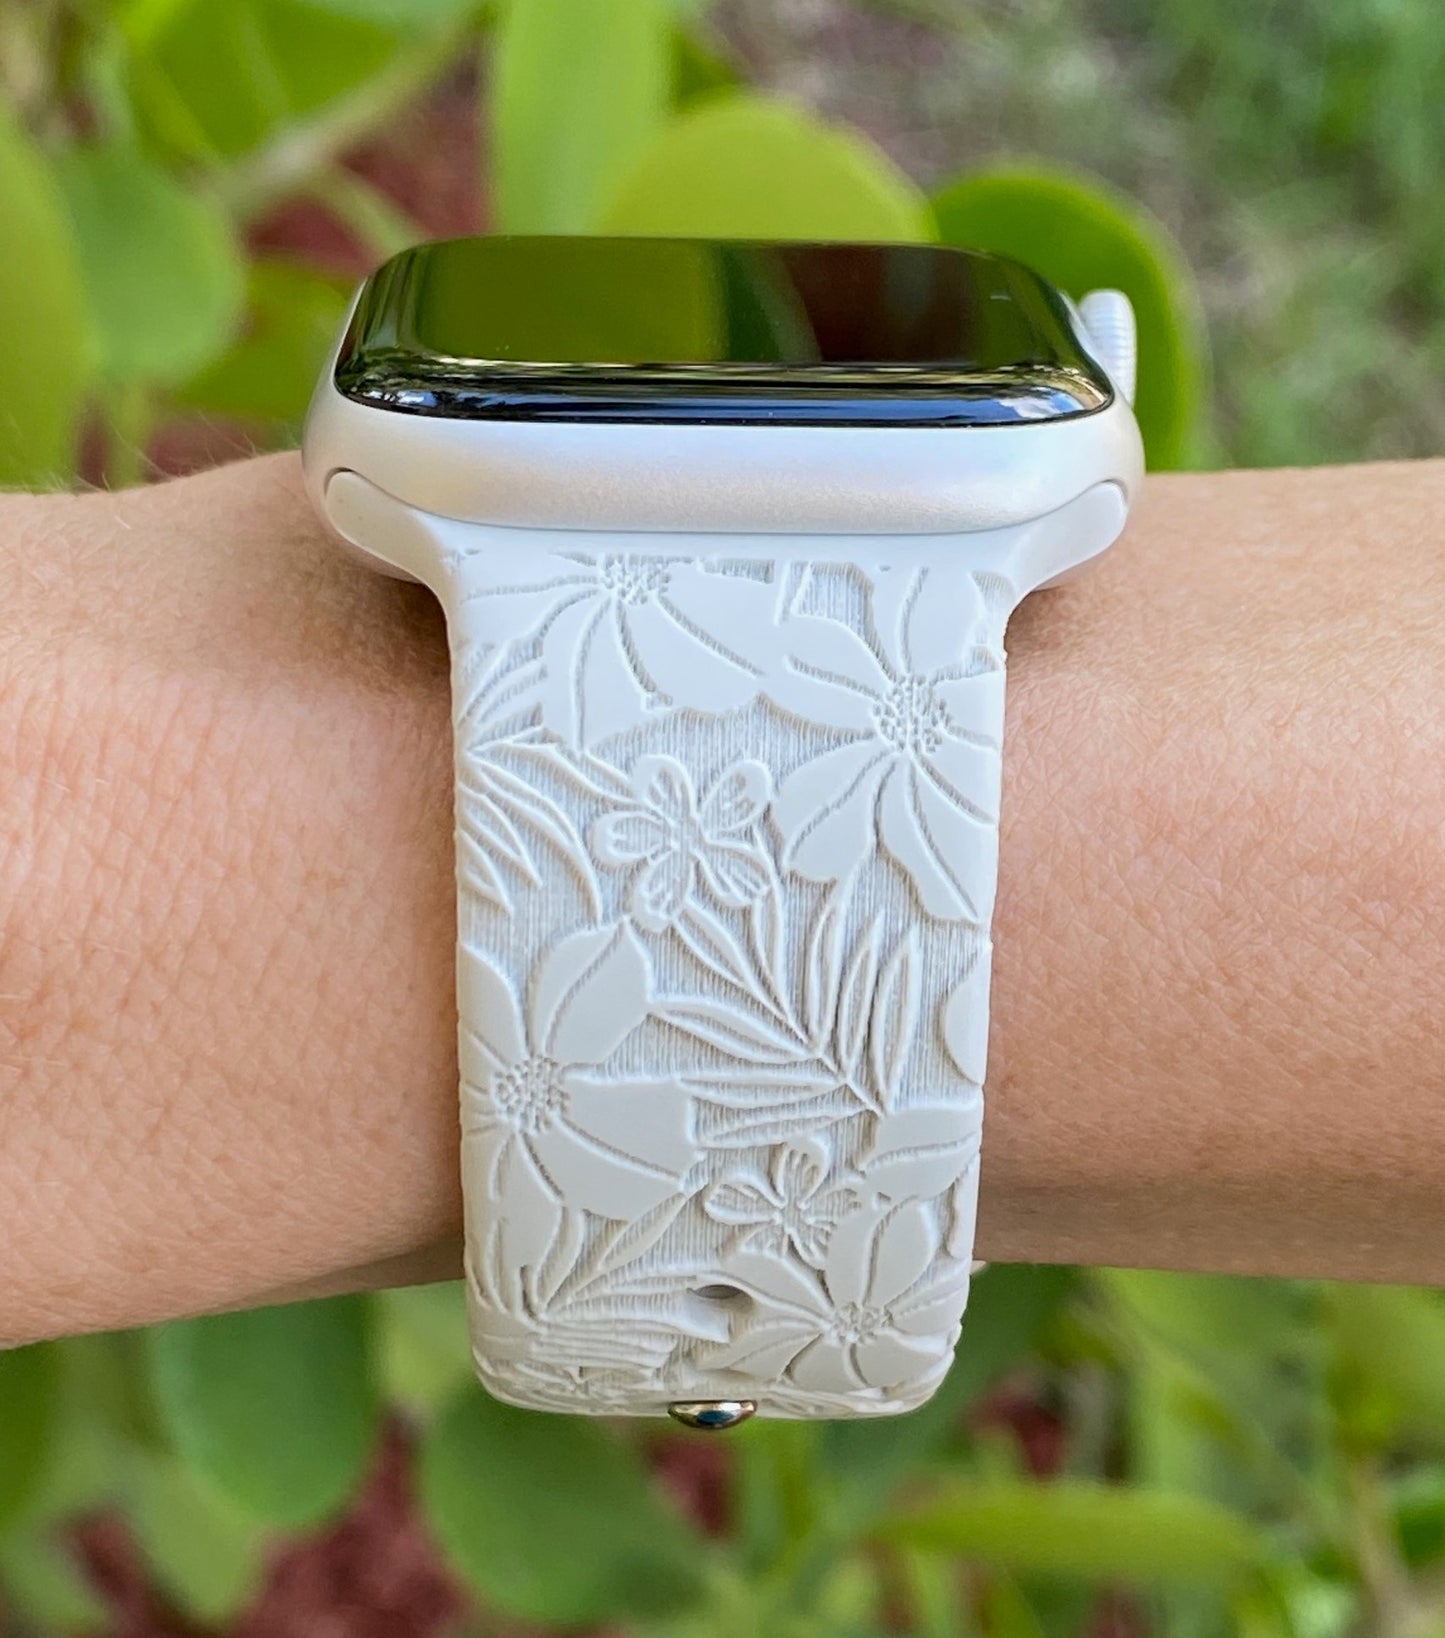 Hibiscus Apple Watch Band